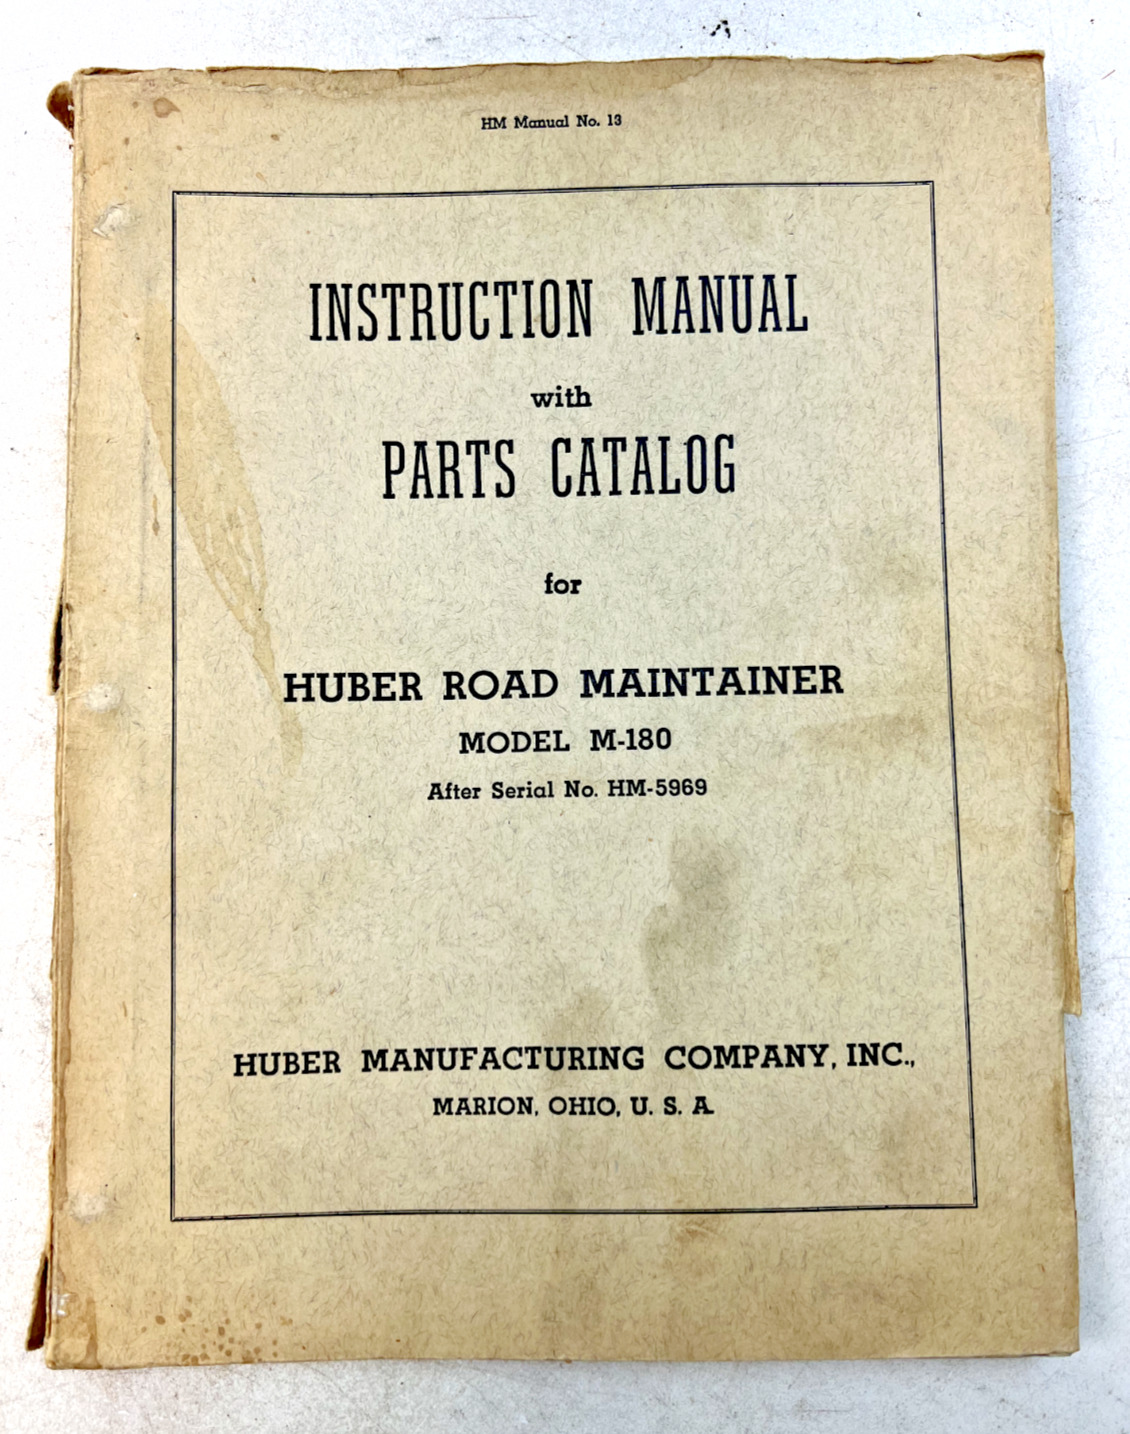 VTG 1950s Instruction Manual w/Parts Catalog for Huber Road Maintainer M-180